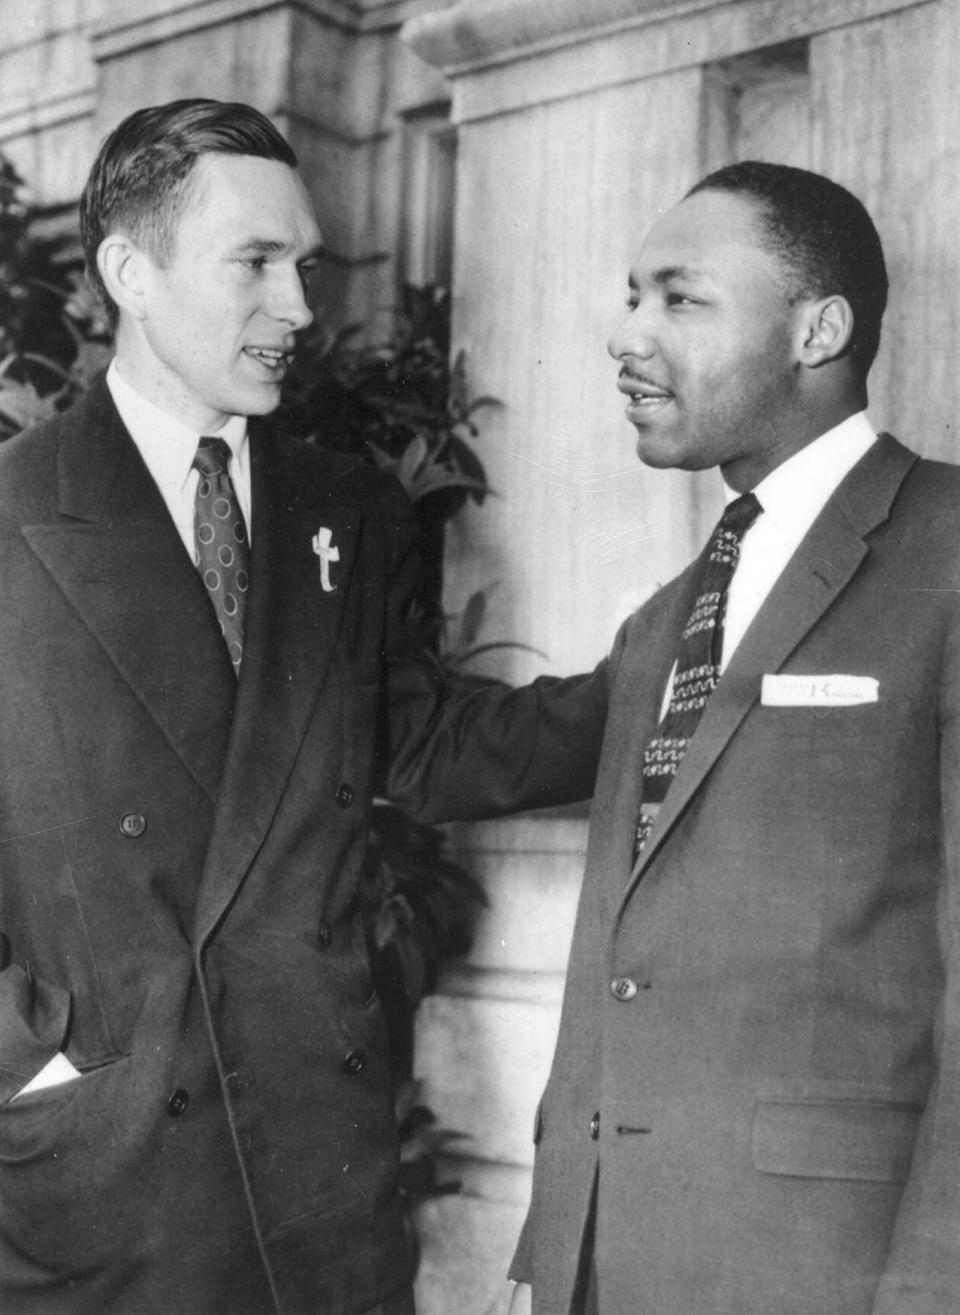 The Rev. Robert Graetz with the Rev. Martin Luther King in Montgomery in the 1950's. Graetz served as a Lutheran minister and led MontgomeryÕs all black Trinity Lutheran Church, and was an early and outspoken advocate of racial equality--he and King became good friends. 